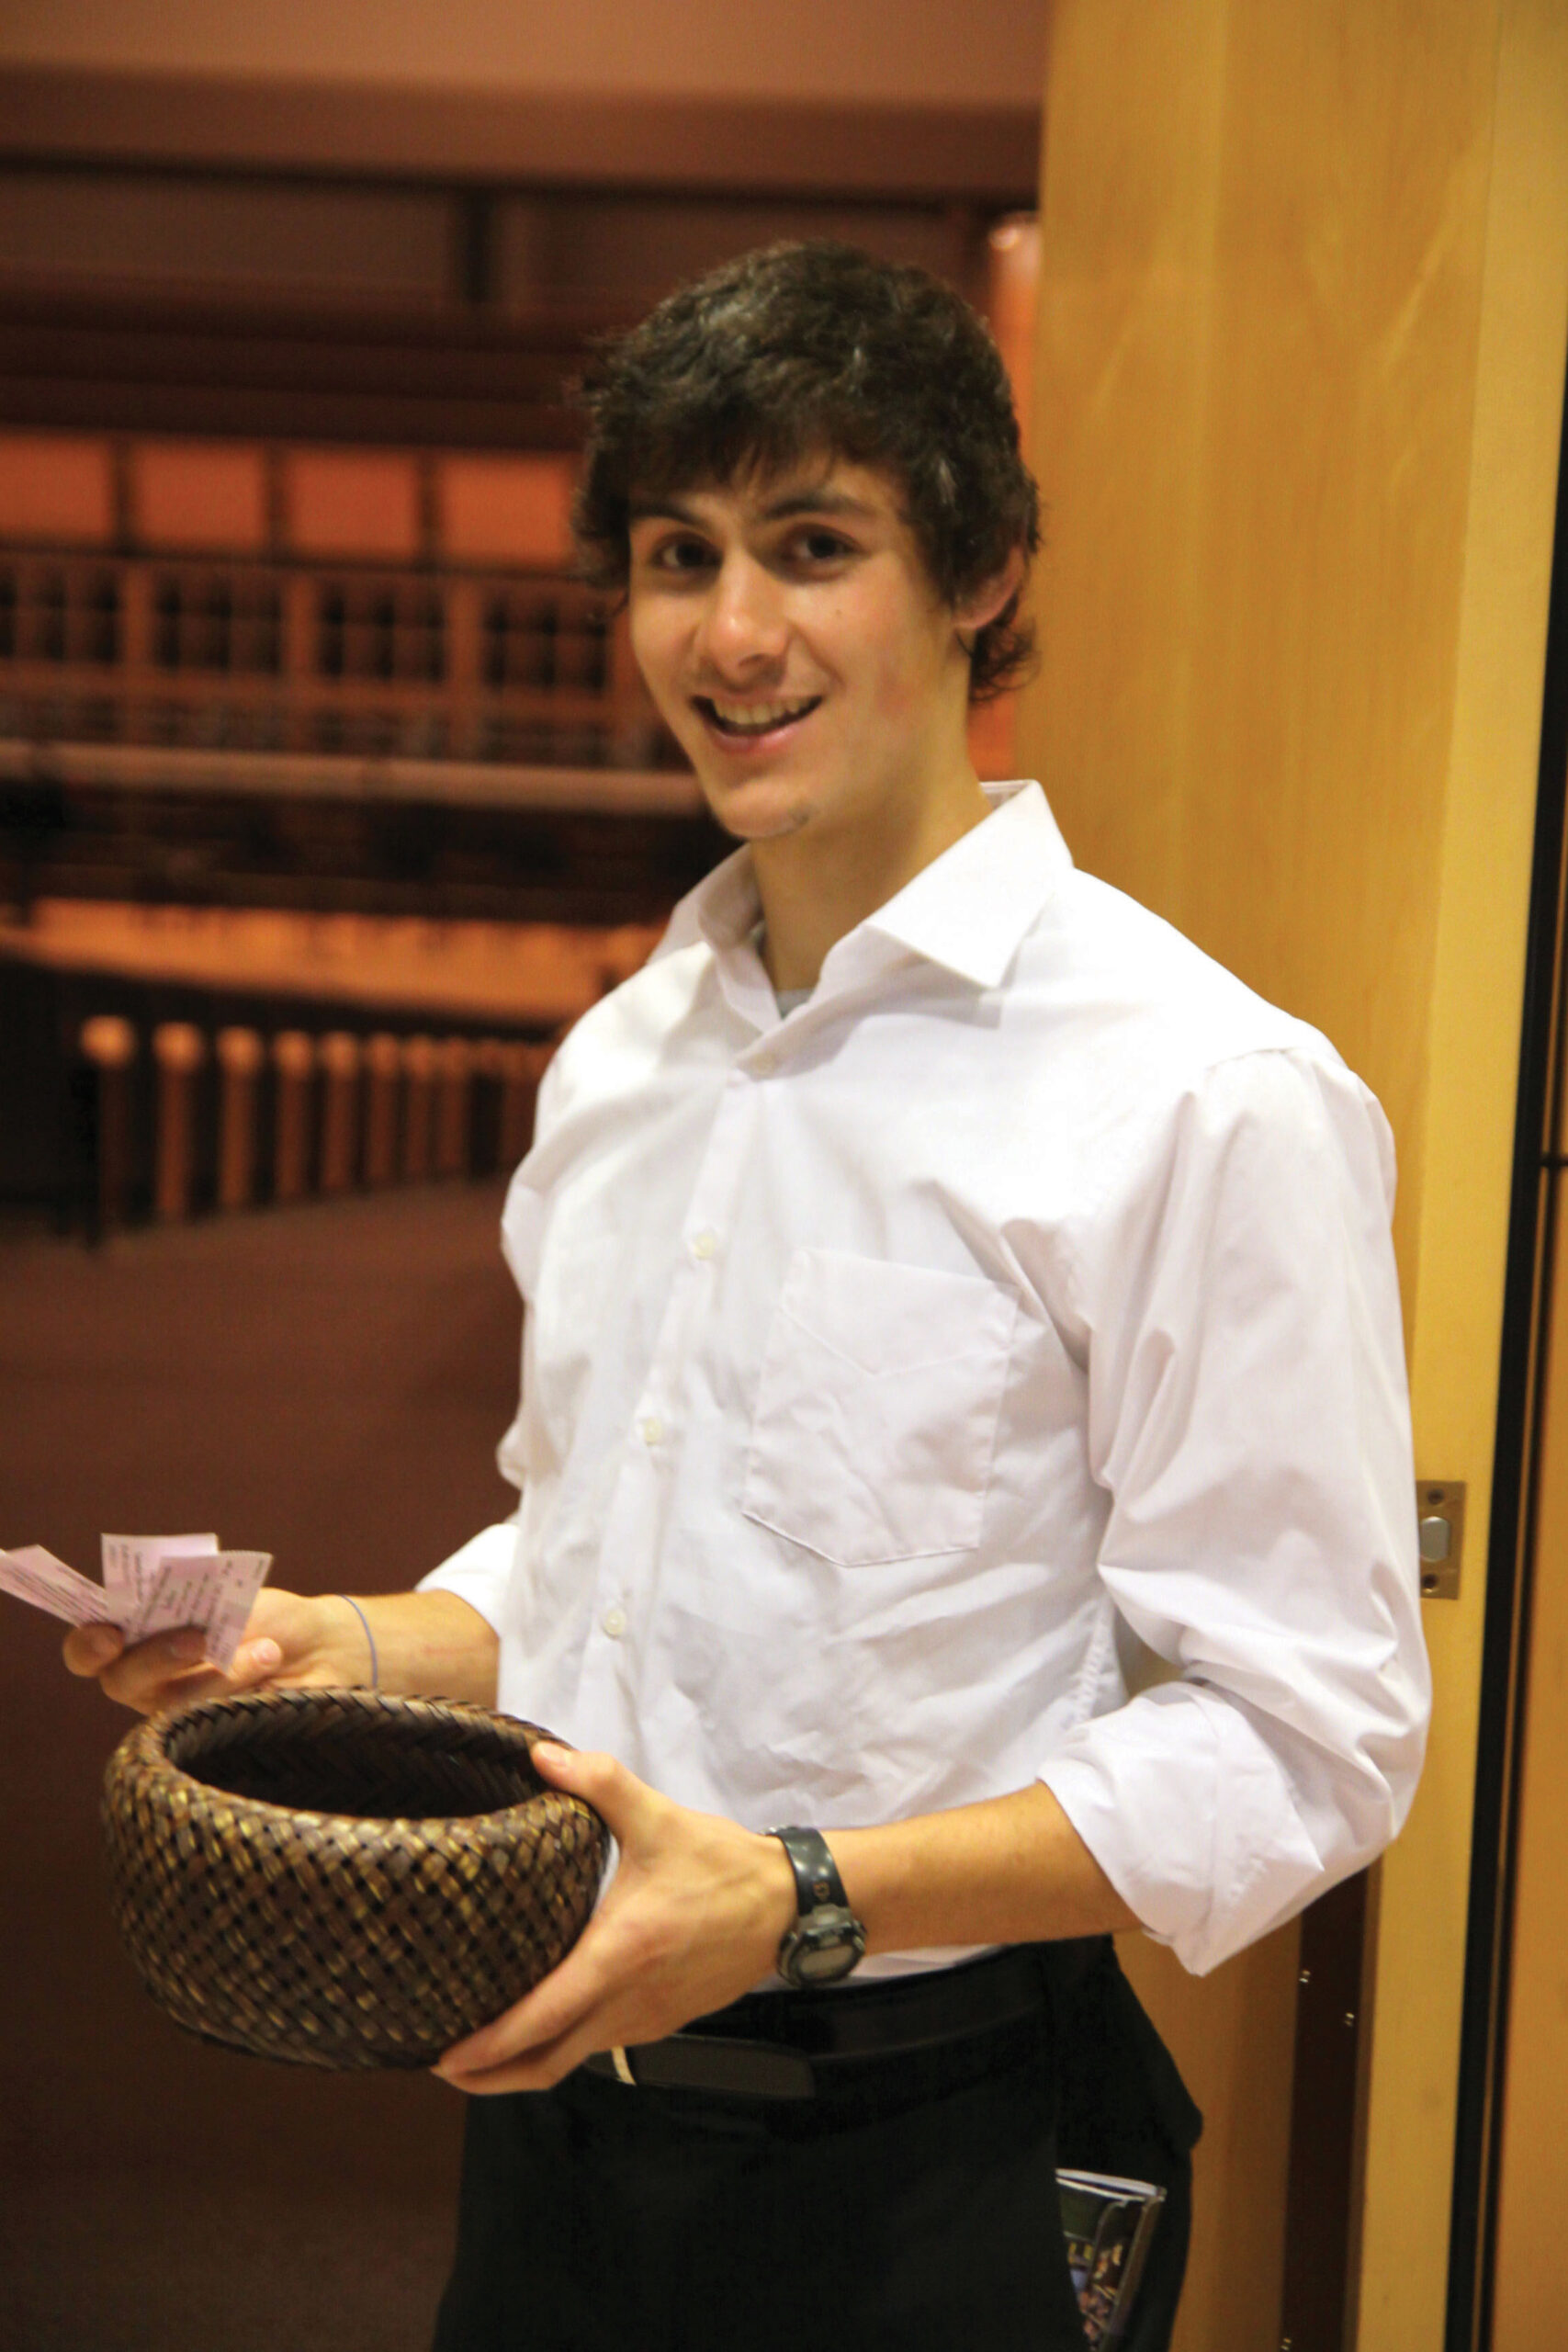 Student usher Lucas Harnish prepares to take patrons' tickets outside Sauder Concert Hall